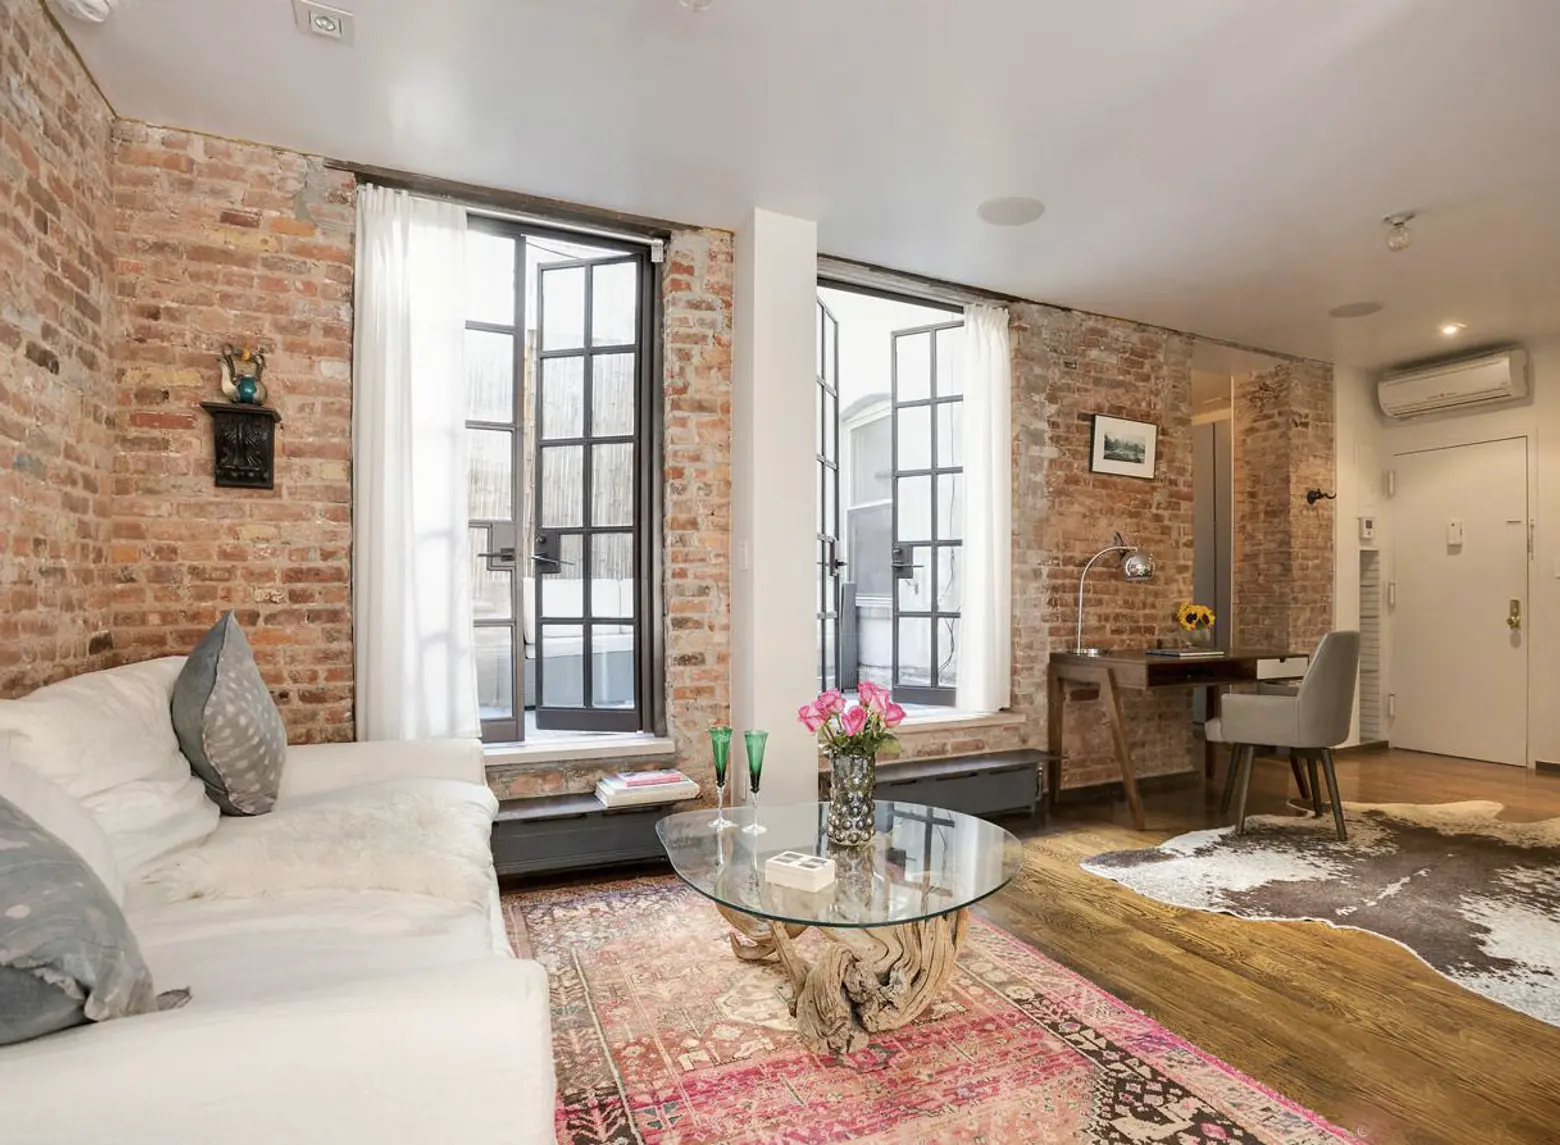 317 East 3rd Street, Cool Listing, East Village, East Village Apartment for sale, Alphabet City, HDFC Building, East Village Co-op for Sale